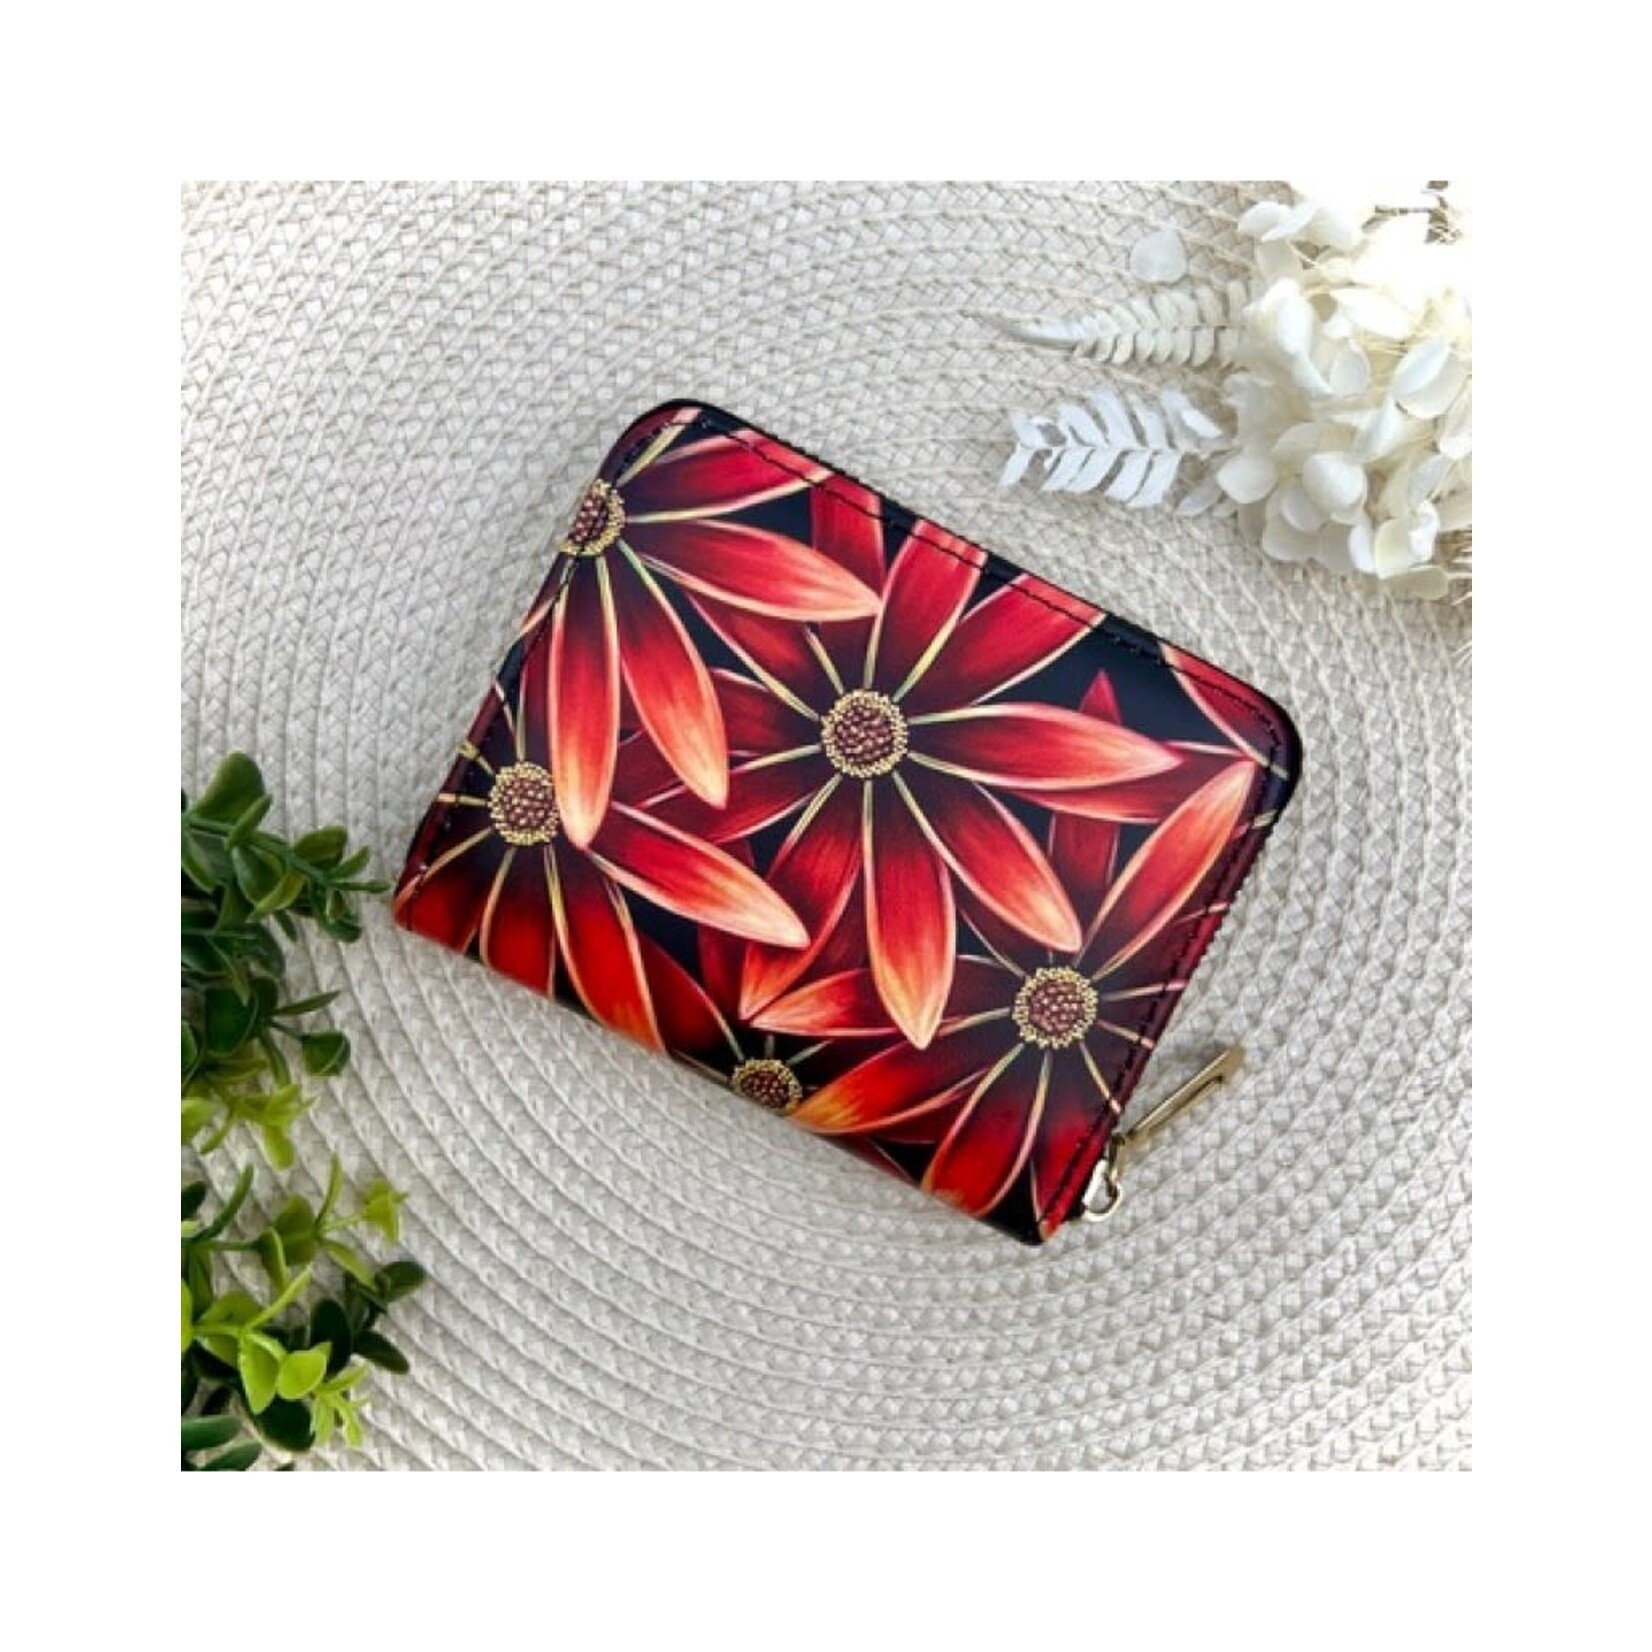 Denise Cassidy Wood Collection Compact Wallets - Denise Cassidy Wood Collection